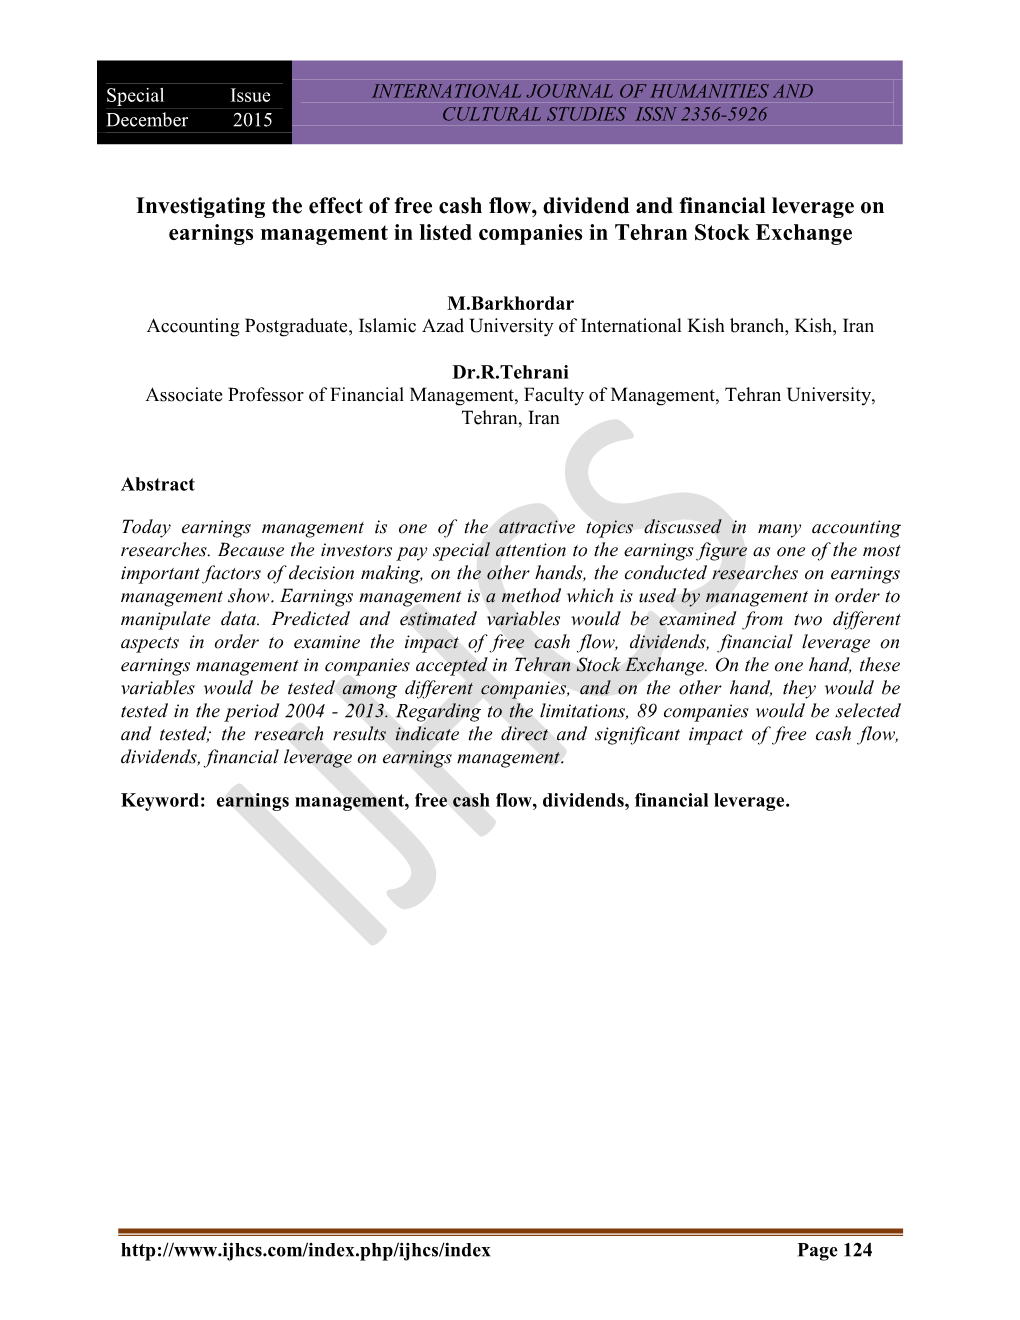 Investigating the Effect of Free Cash Flow, Dividend and Financial Leverage on Earnings Management in Listed Companies in Tehran Stock Exchange